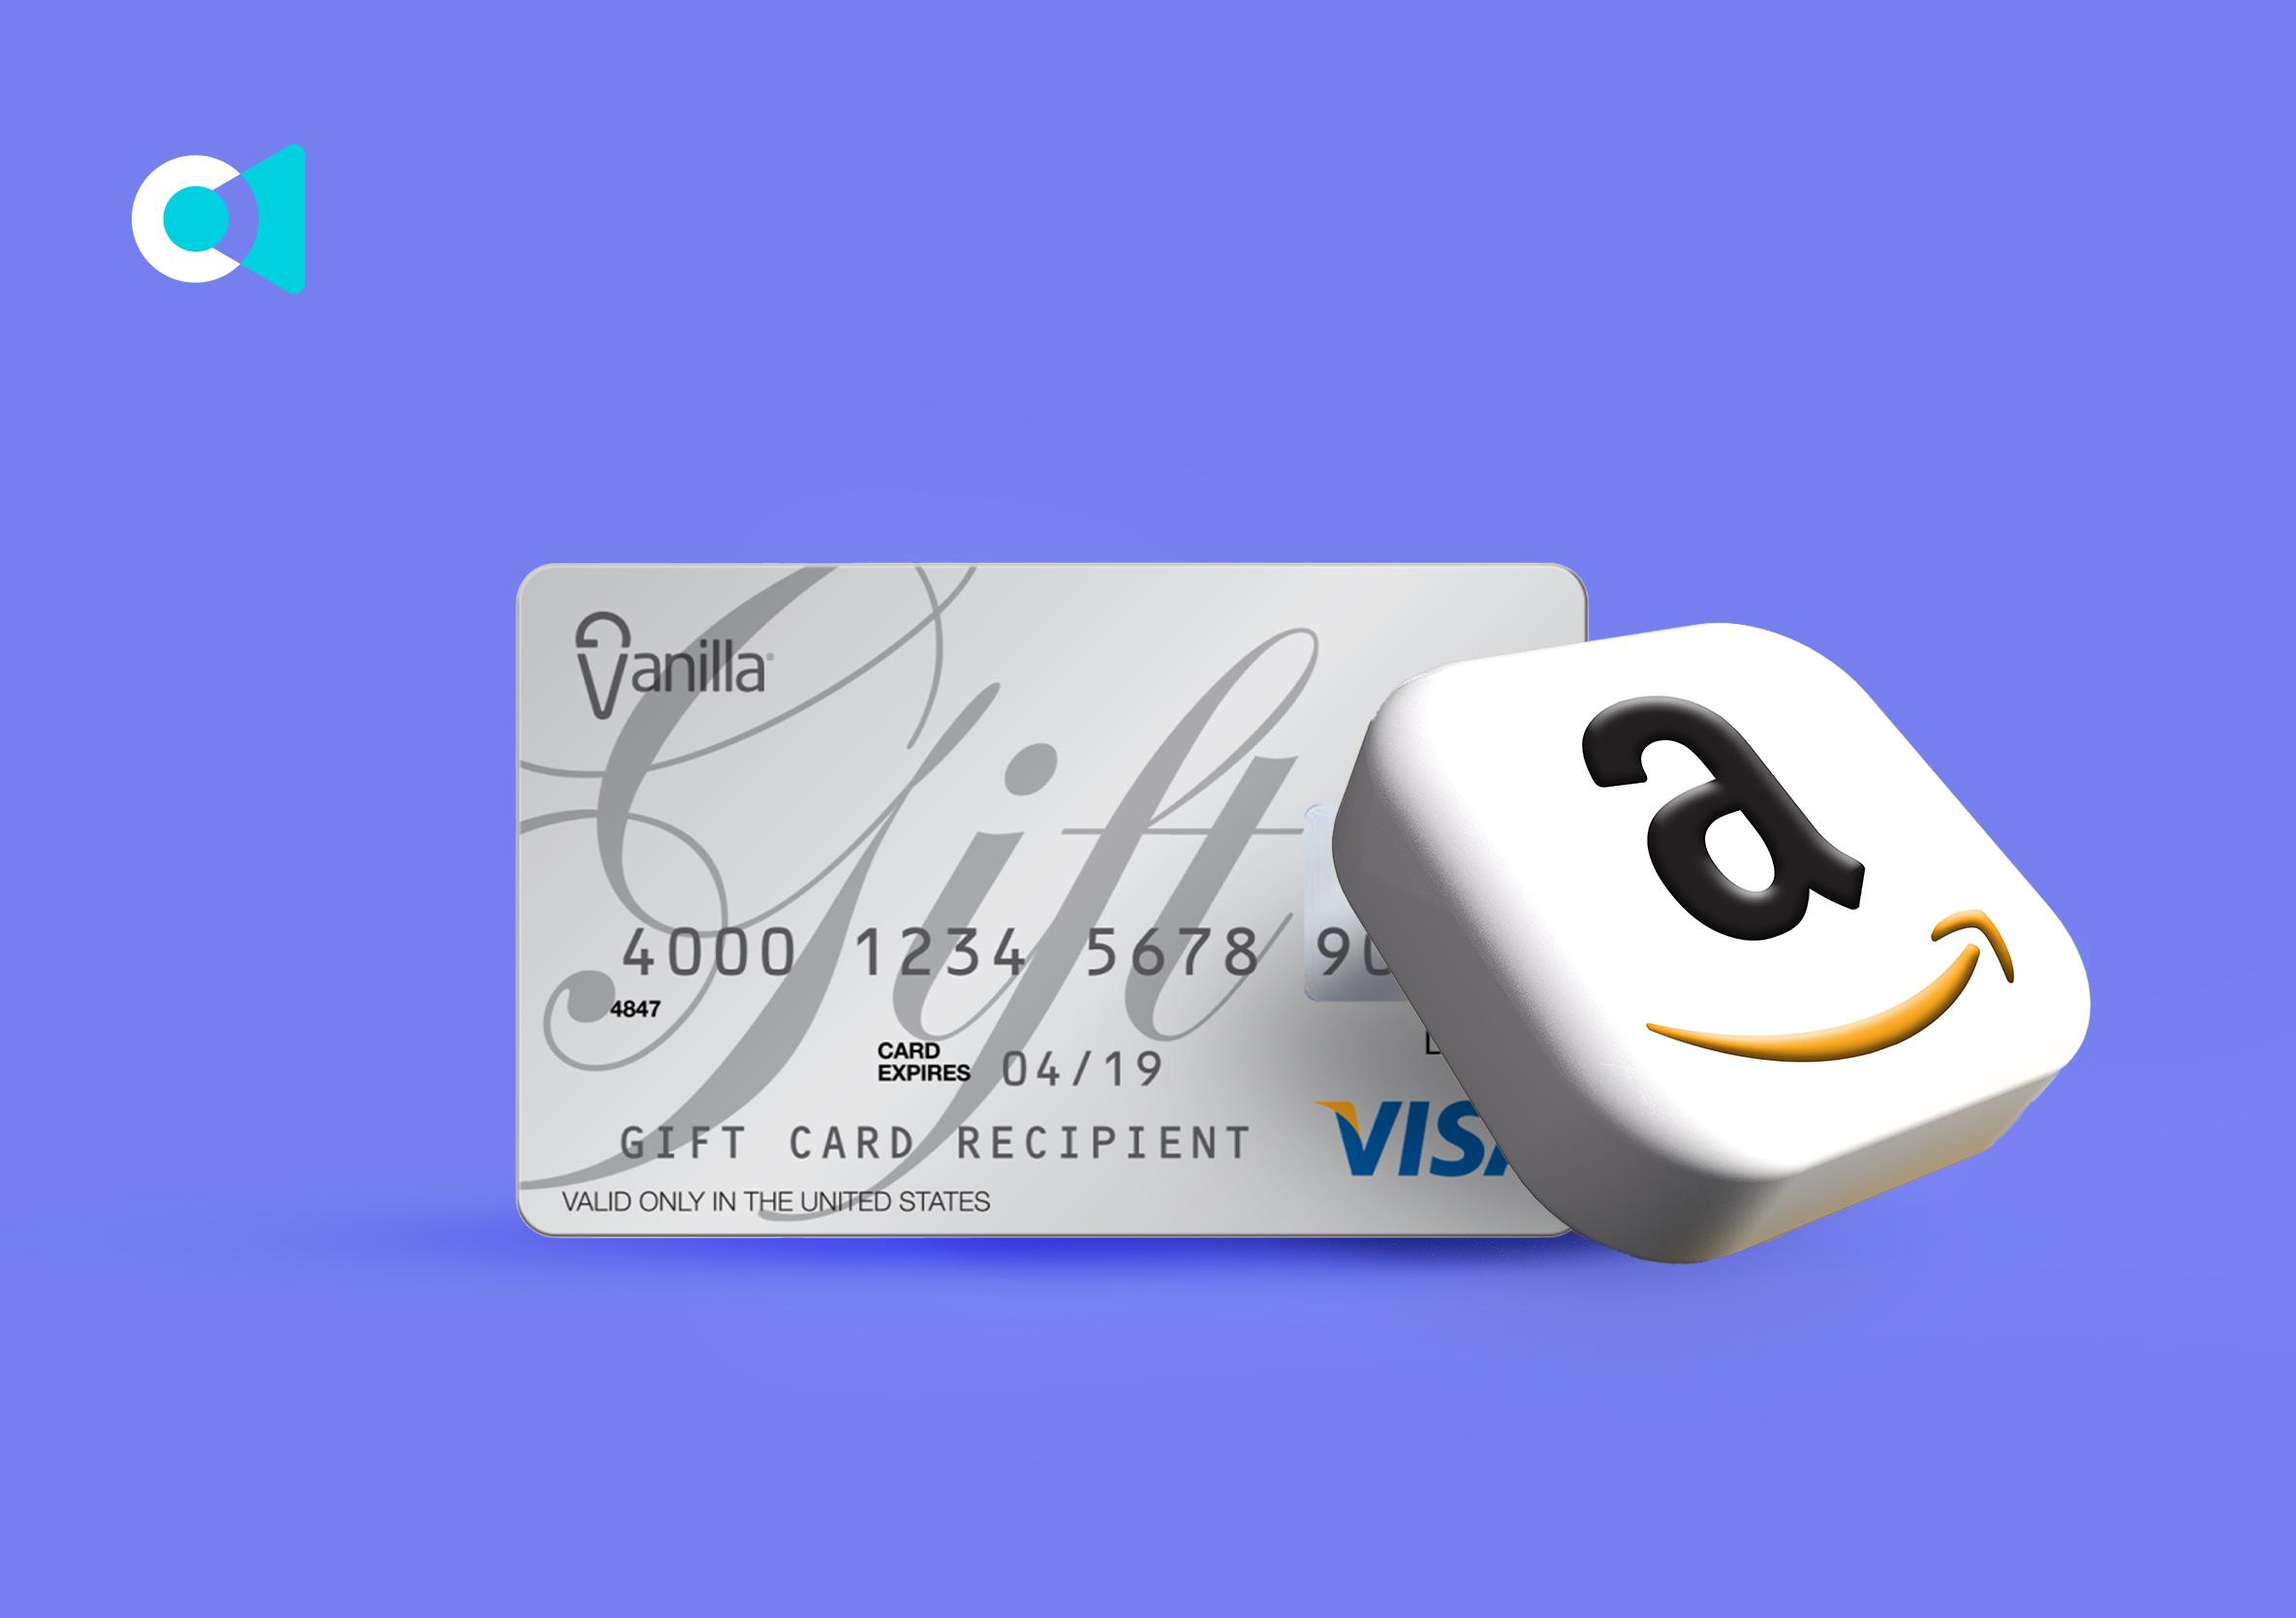 Buying gift cards this Christmas? Or Check Visa Gift Card Balance by  vanilagifts - Issuu